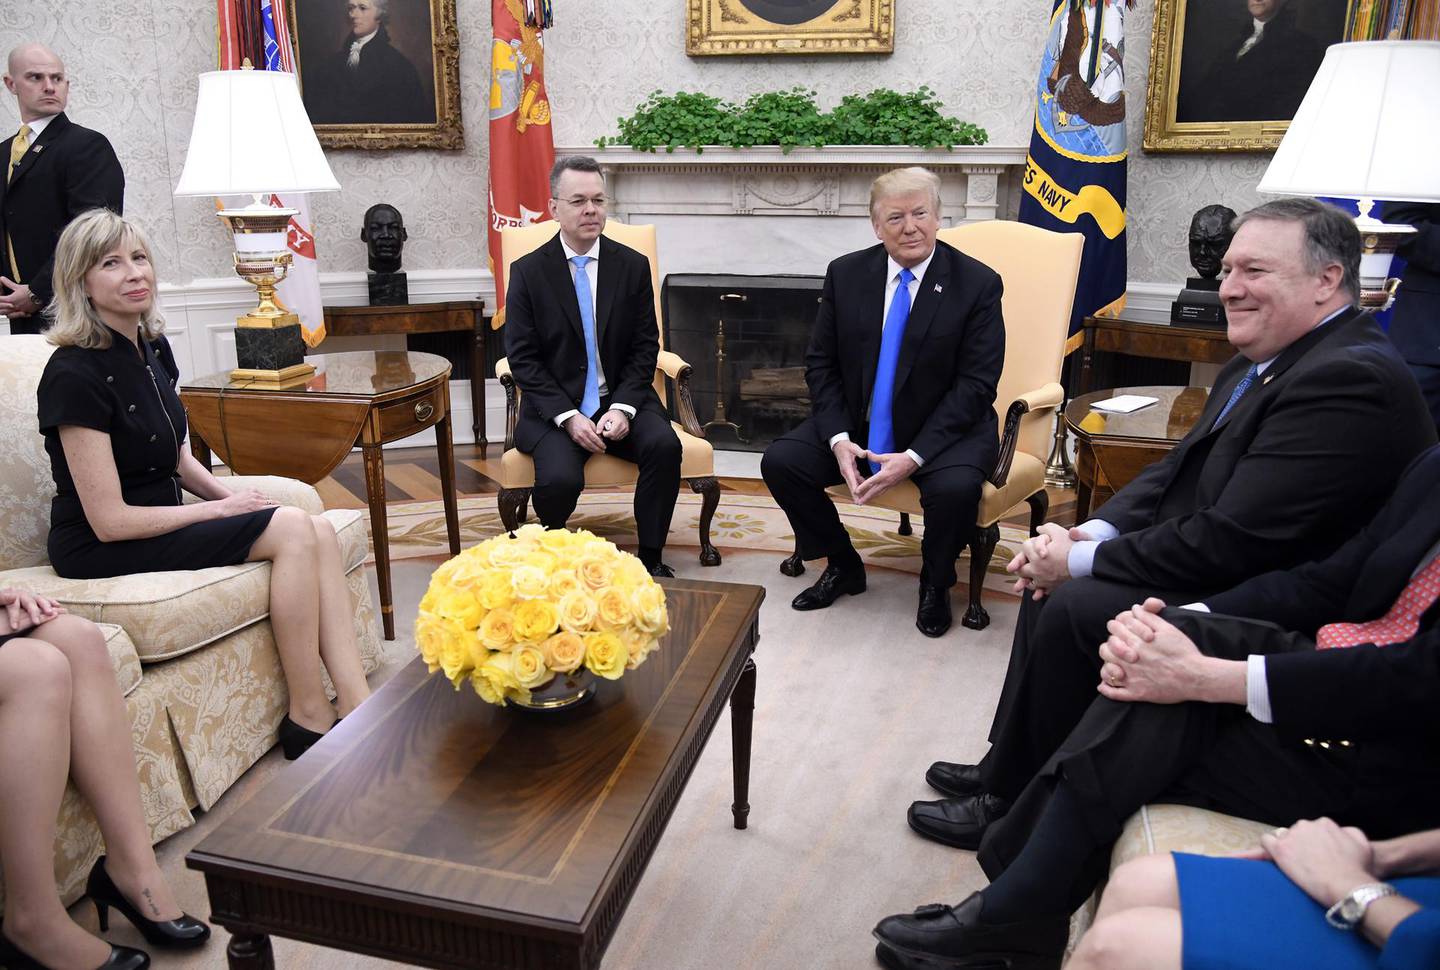 epa07091495 US President Donald J. Trump (C-R) meets with Pastor Andrew Brunson (C-L) as his wife Norine Brunson (L) and US Secretary of State Mike Pompeo (R) look on in the Oval Office of the White House in Washington, DC., USA, 13 October 2018. Pastor Andrew Brunson arrived back in the USA on 13 October after being released from prison in Turkey on 12 October in which he was held for two years on terrorism charges.  EPA/OLIVIER DOULIERY / POOL